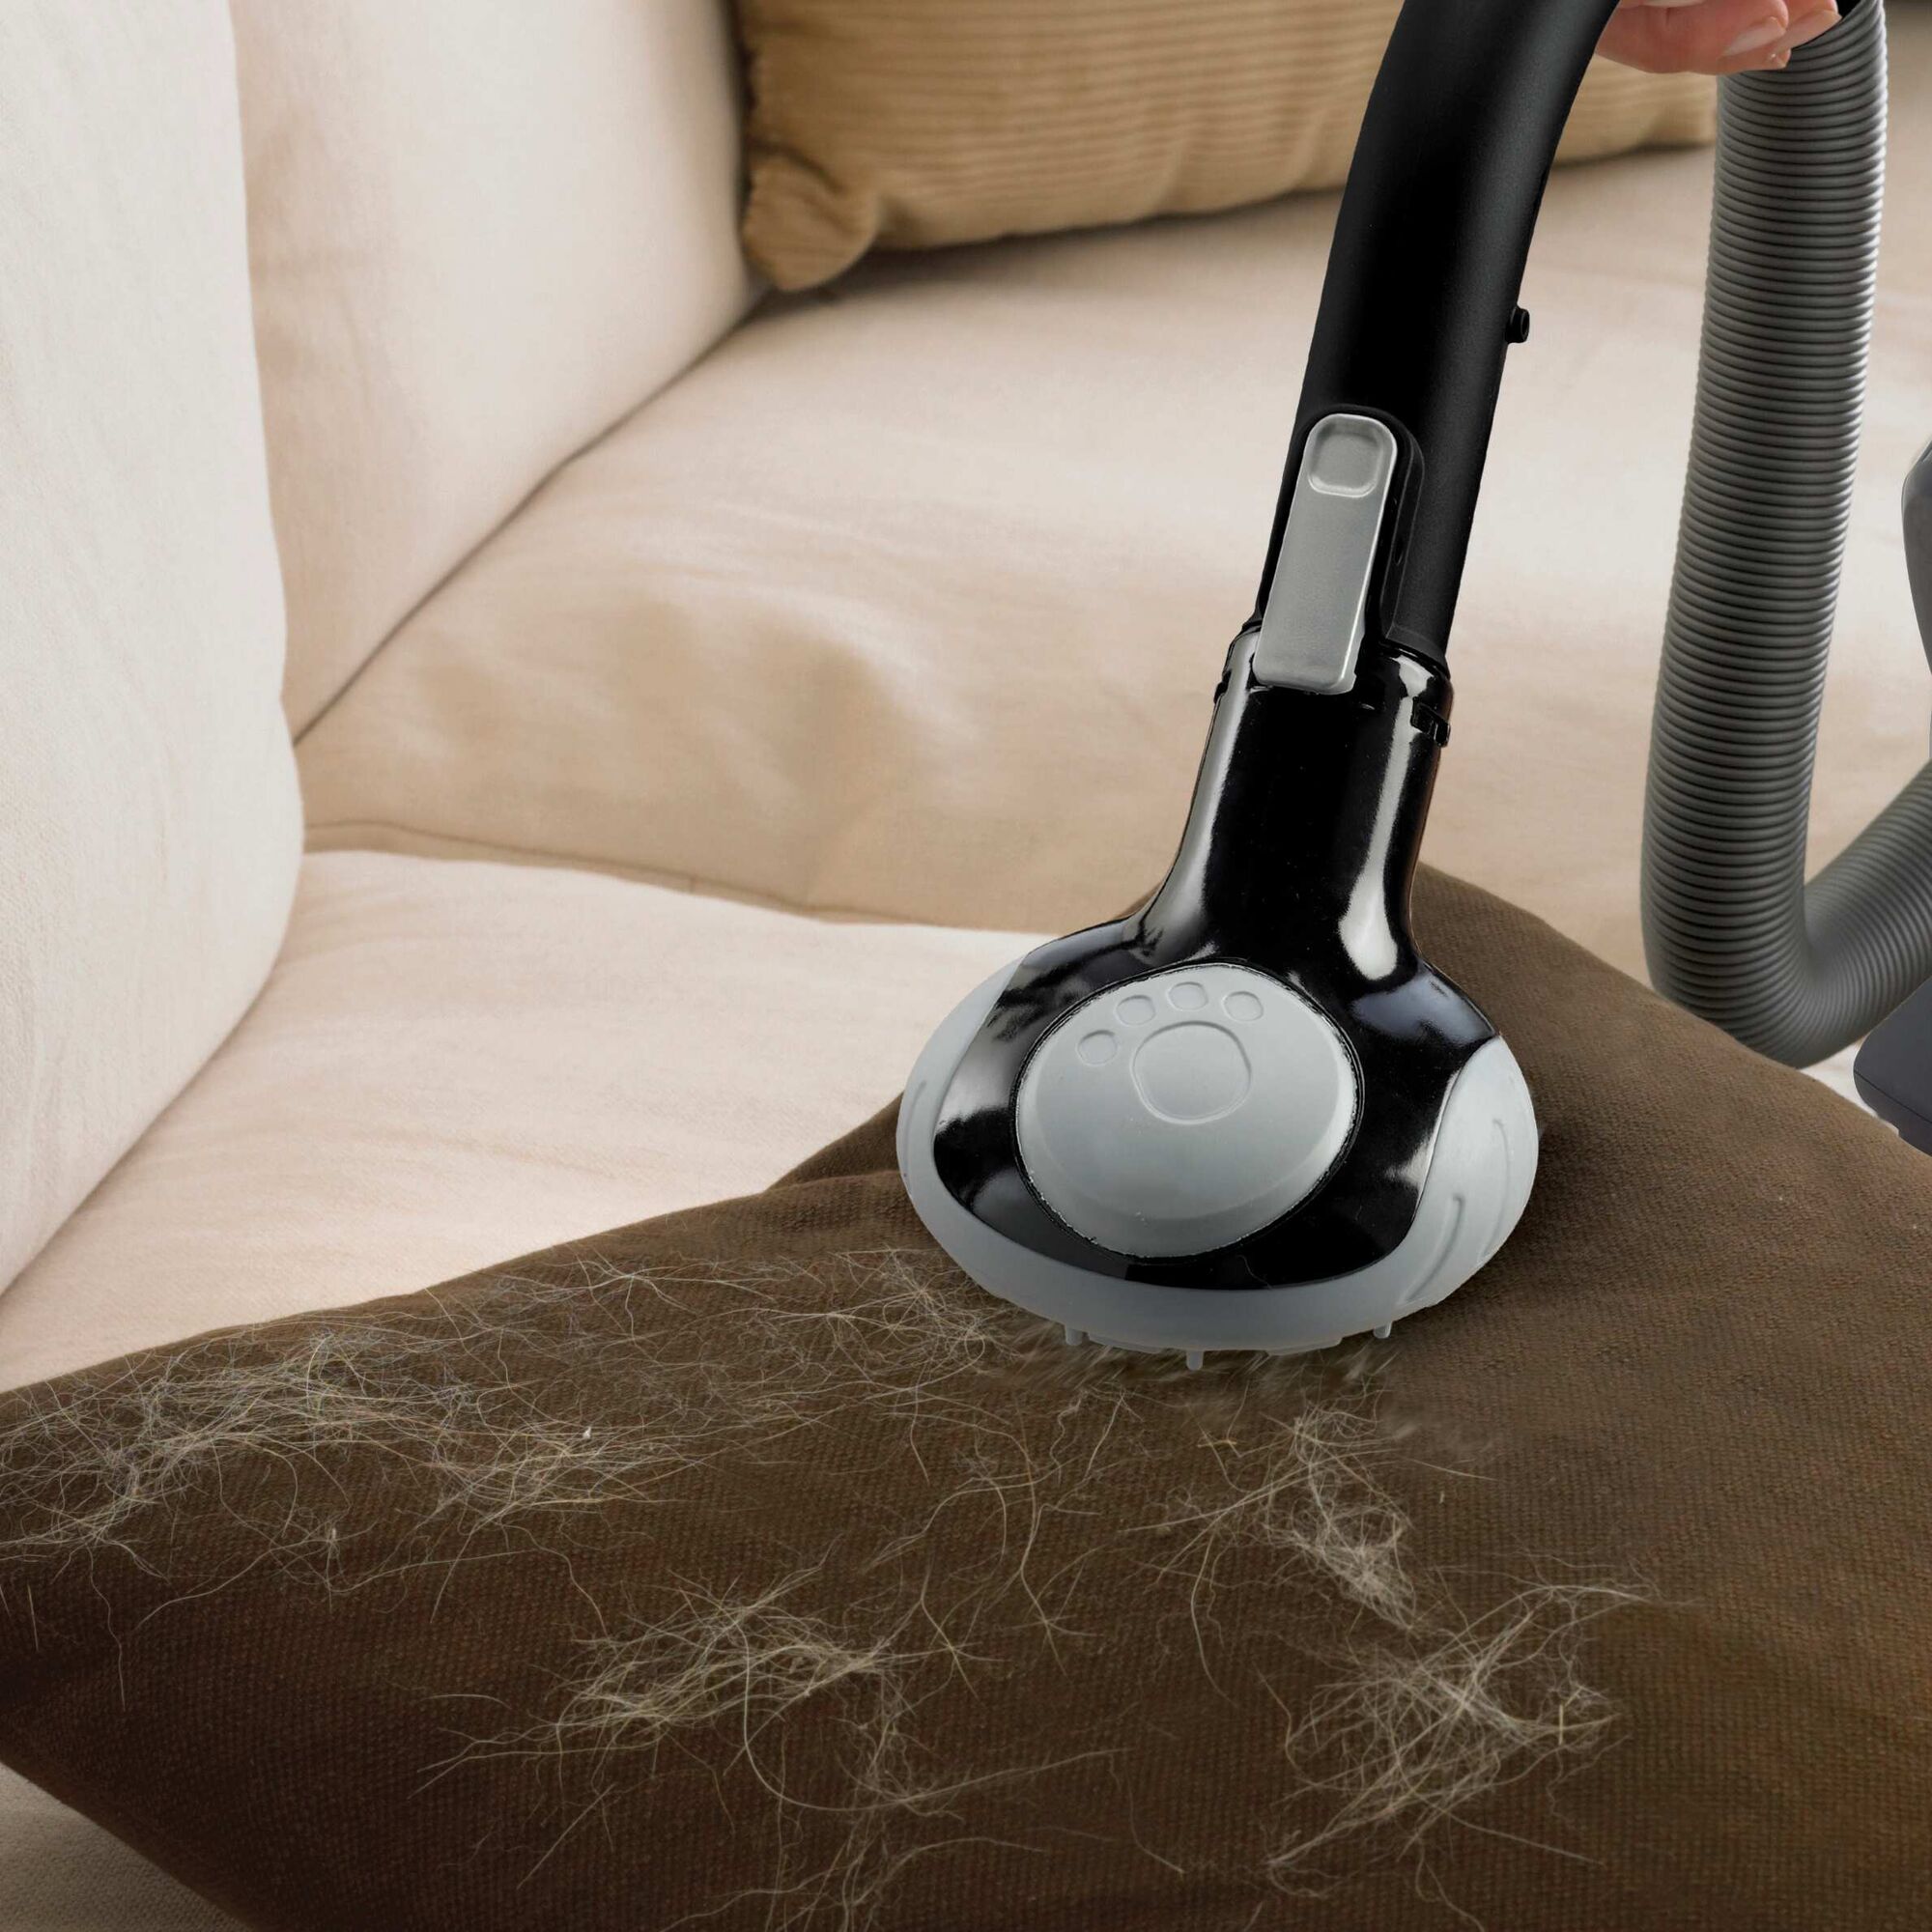 dust buster Flex Cordless Hand Vacuum being used to clean fur from couch cushions.